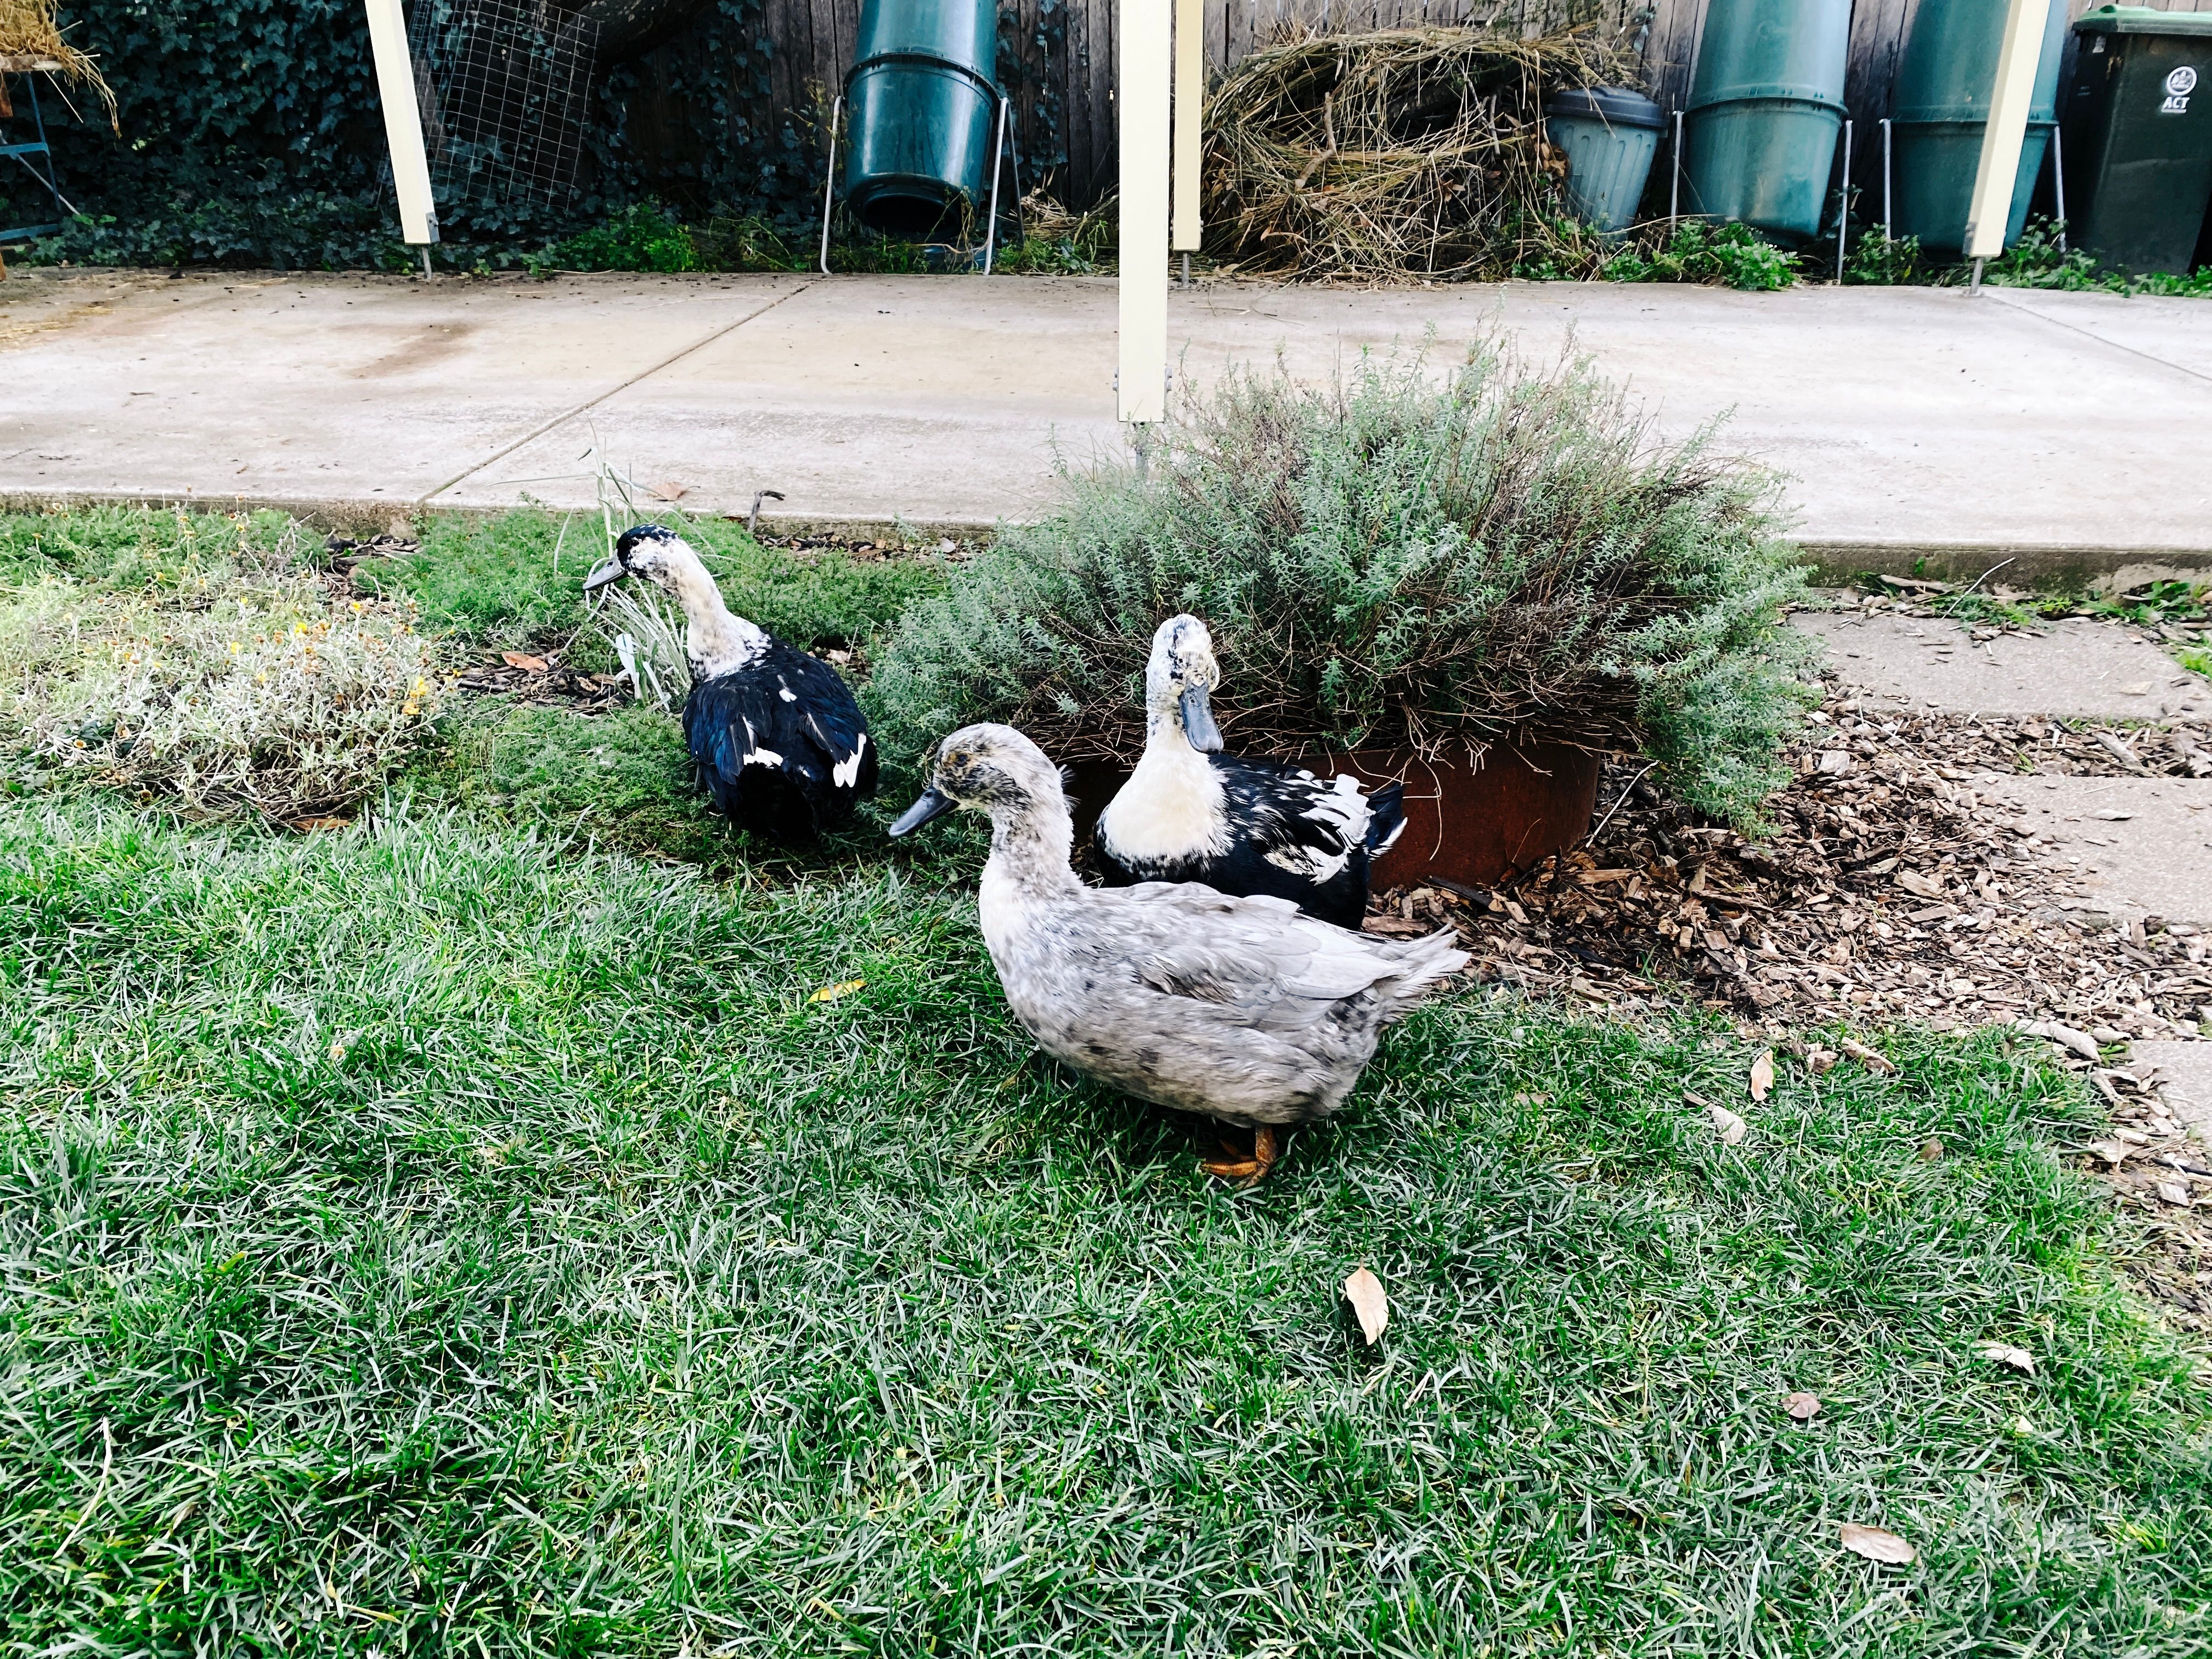 A photo of three grey/black ducks standing on some grass next to a plant.